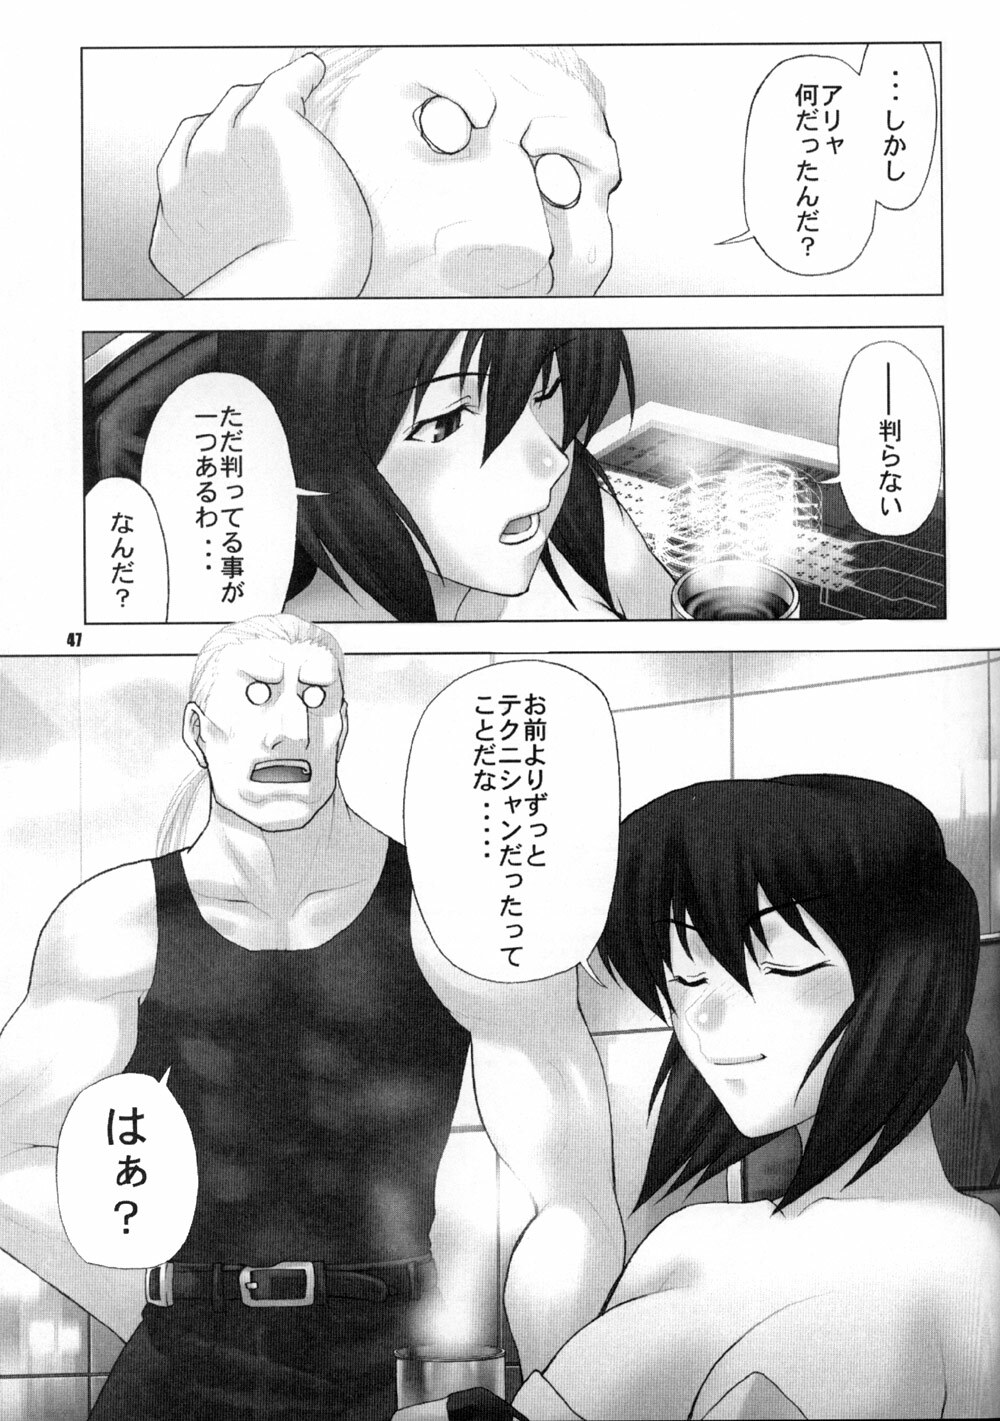 (C66) [Runners High (Chiba Toshirou)] CELLULOID - ACME (Ghost in the Shell) page 47 full